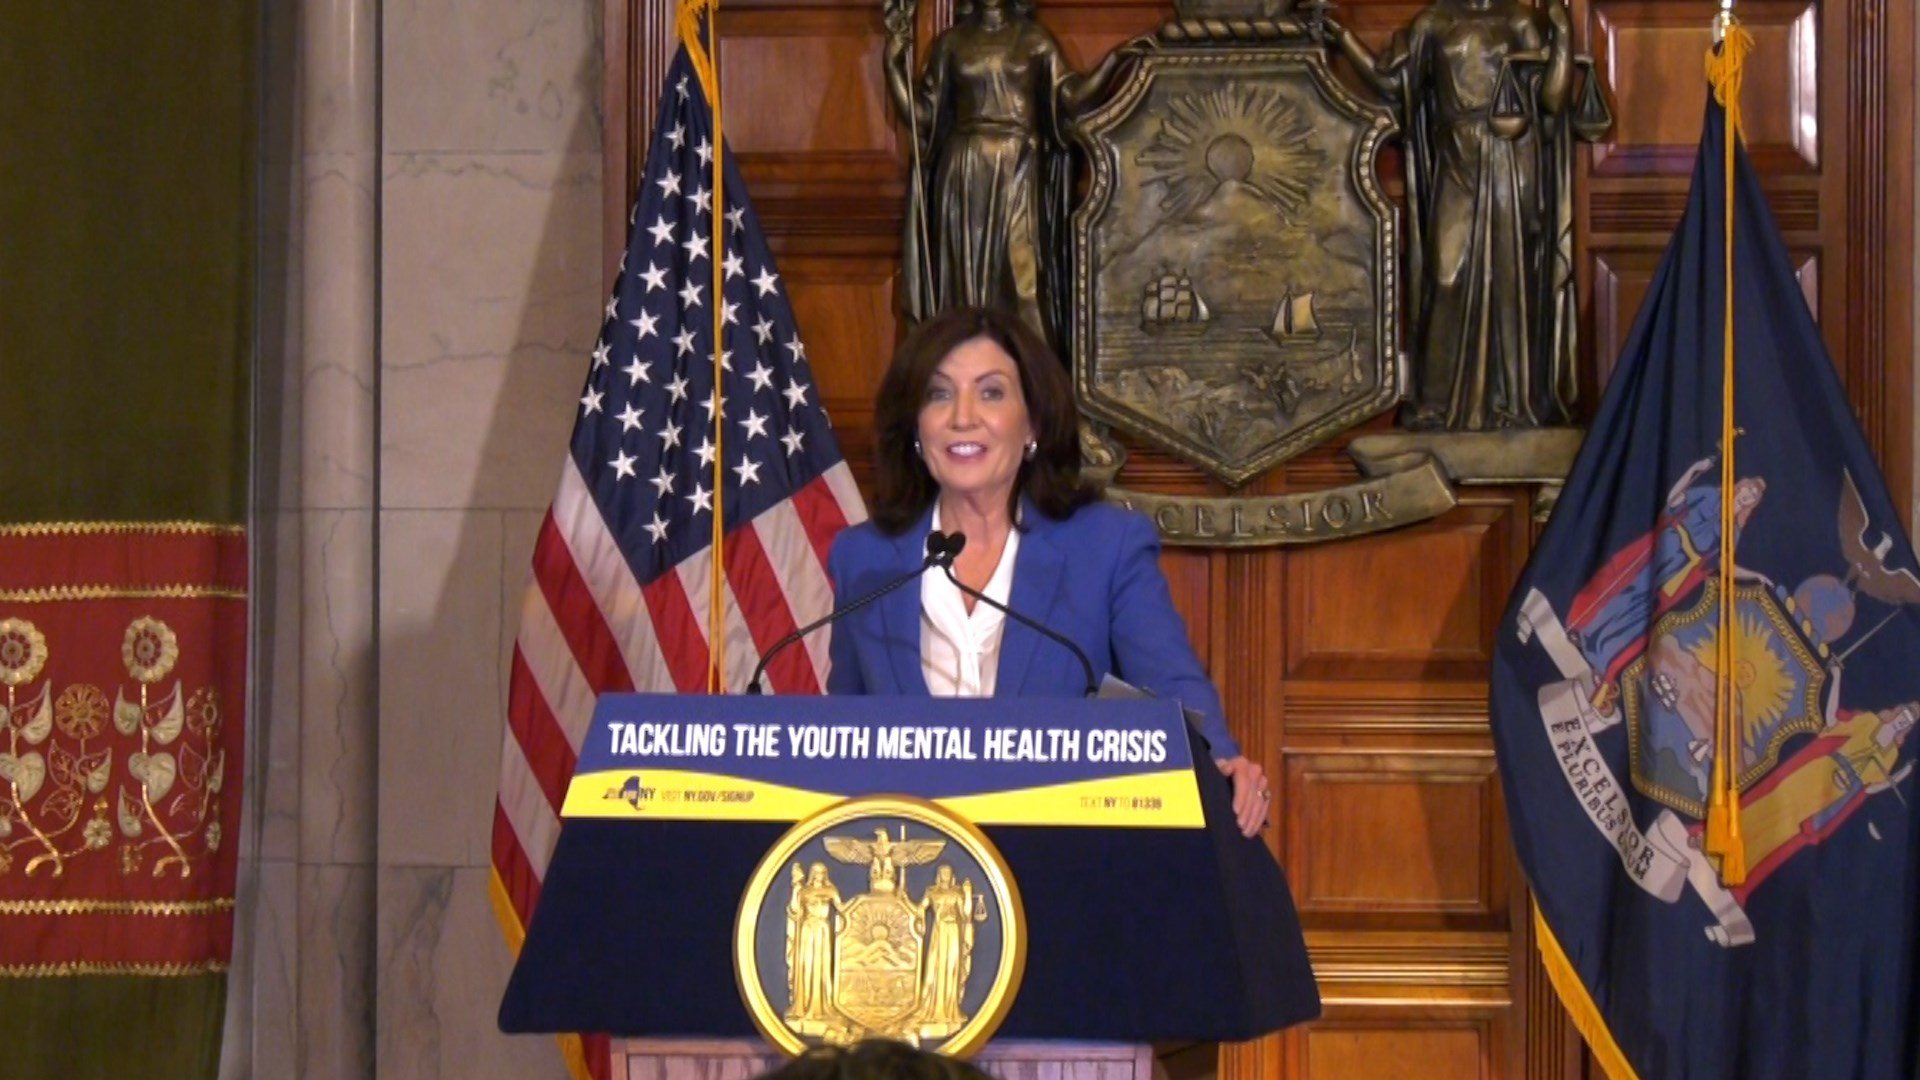 Gov. Hochul says kids' mental health is a top priority